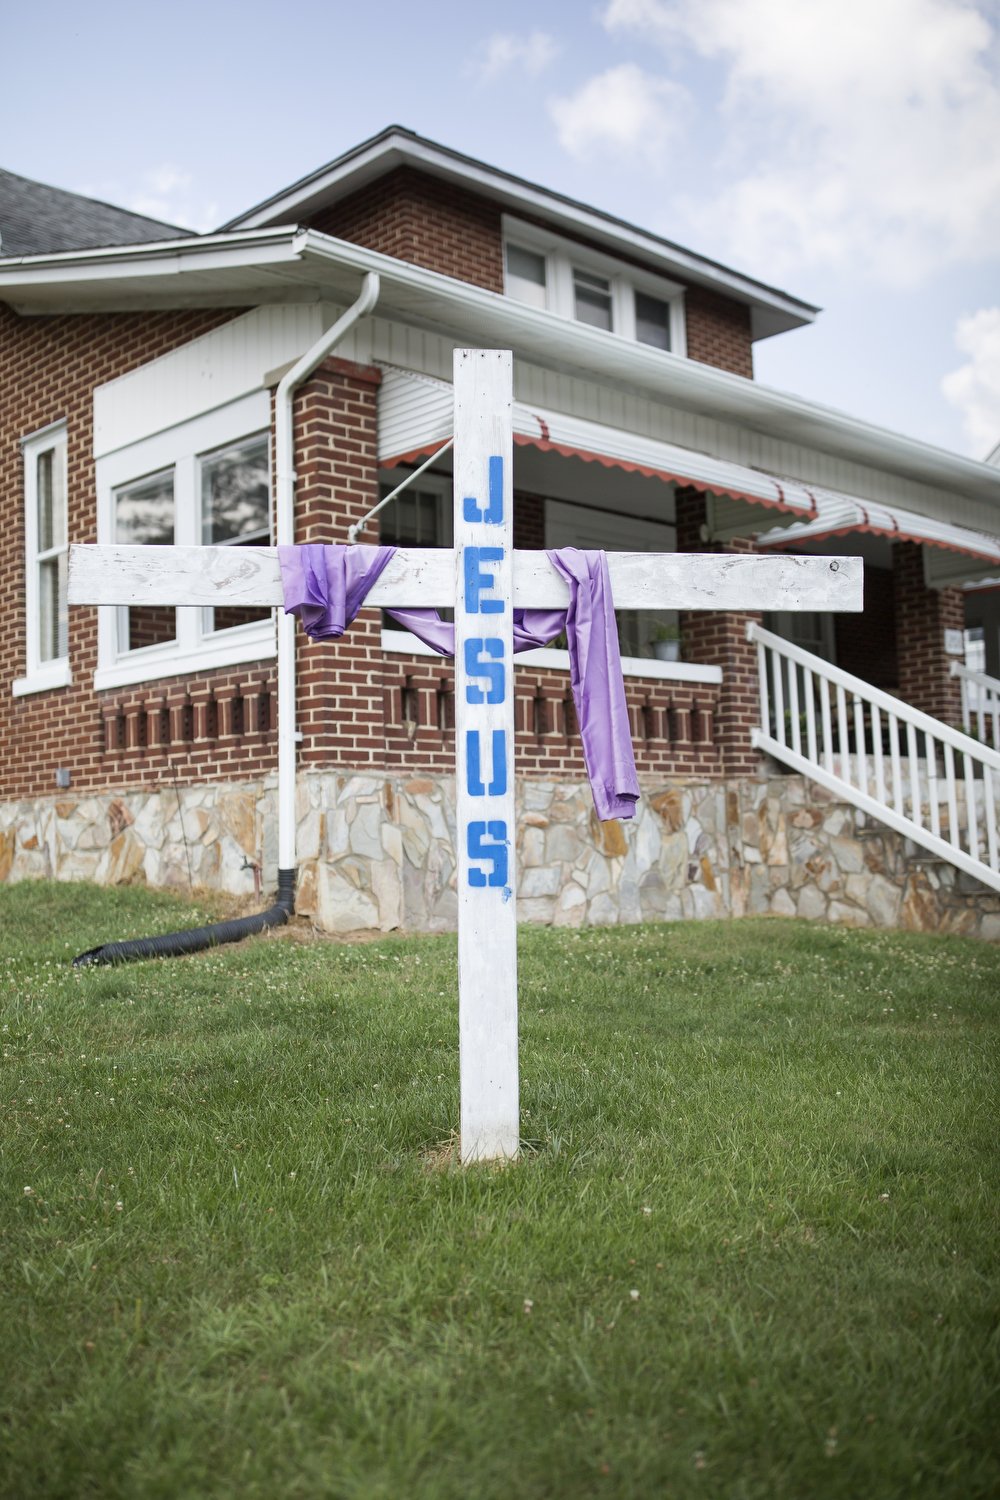  A cross stands outside a home in Galax, Virginia. With a population of just around 7,000, the town of Galax in rural southwest Virginia has one of the fastest-growing Hispanic populations in the state. Residents in town have a wide range of views ab